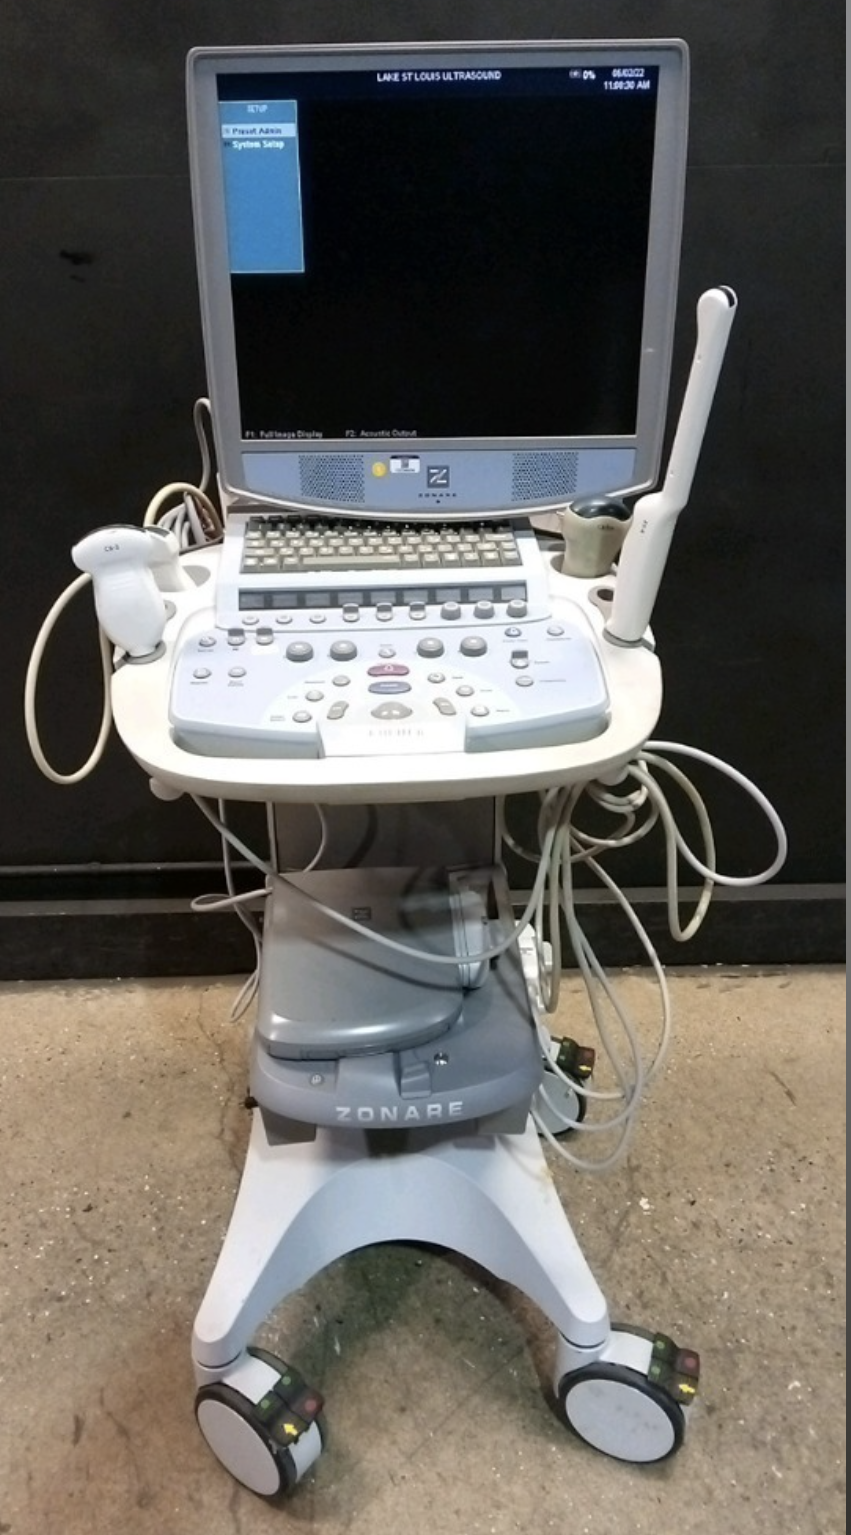 ZONARE Z ONE ULTRASOUND MACHINE WITH 4 PROBES - C6-2, E9-4, C8-33D 